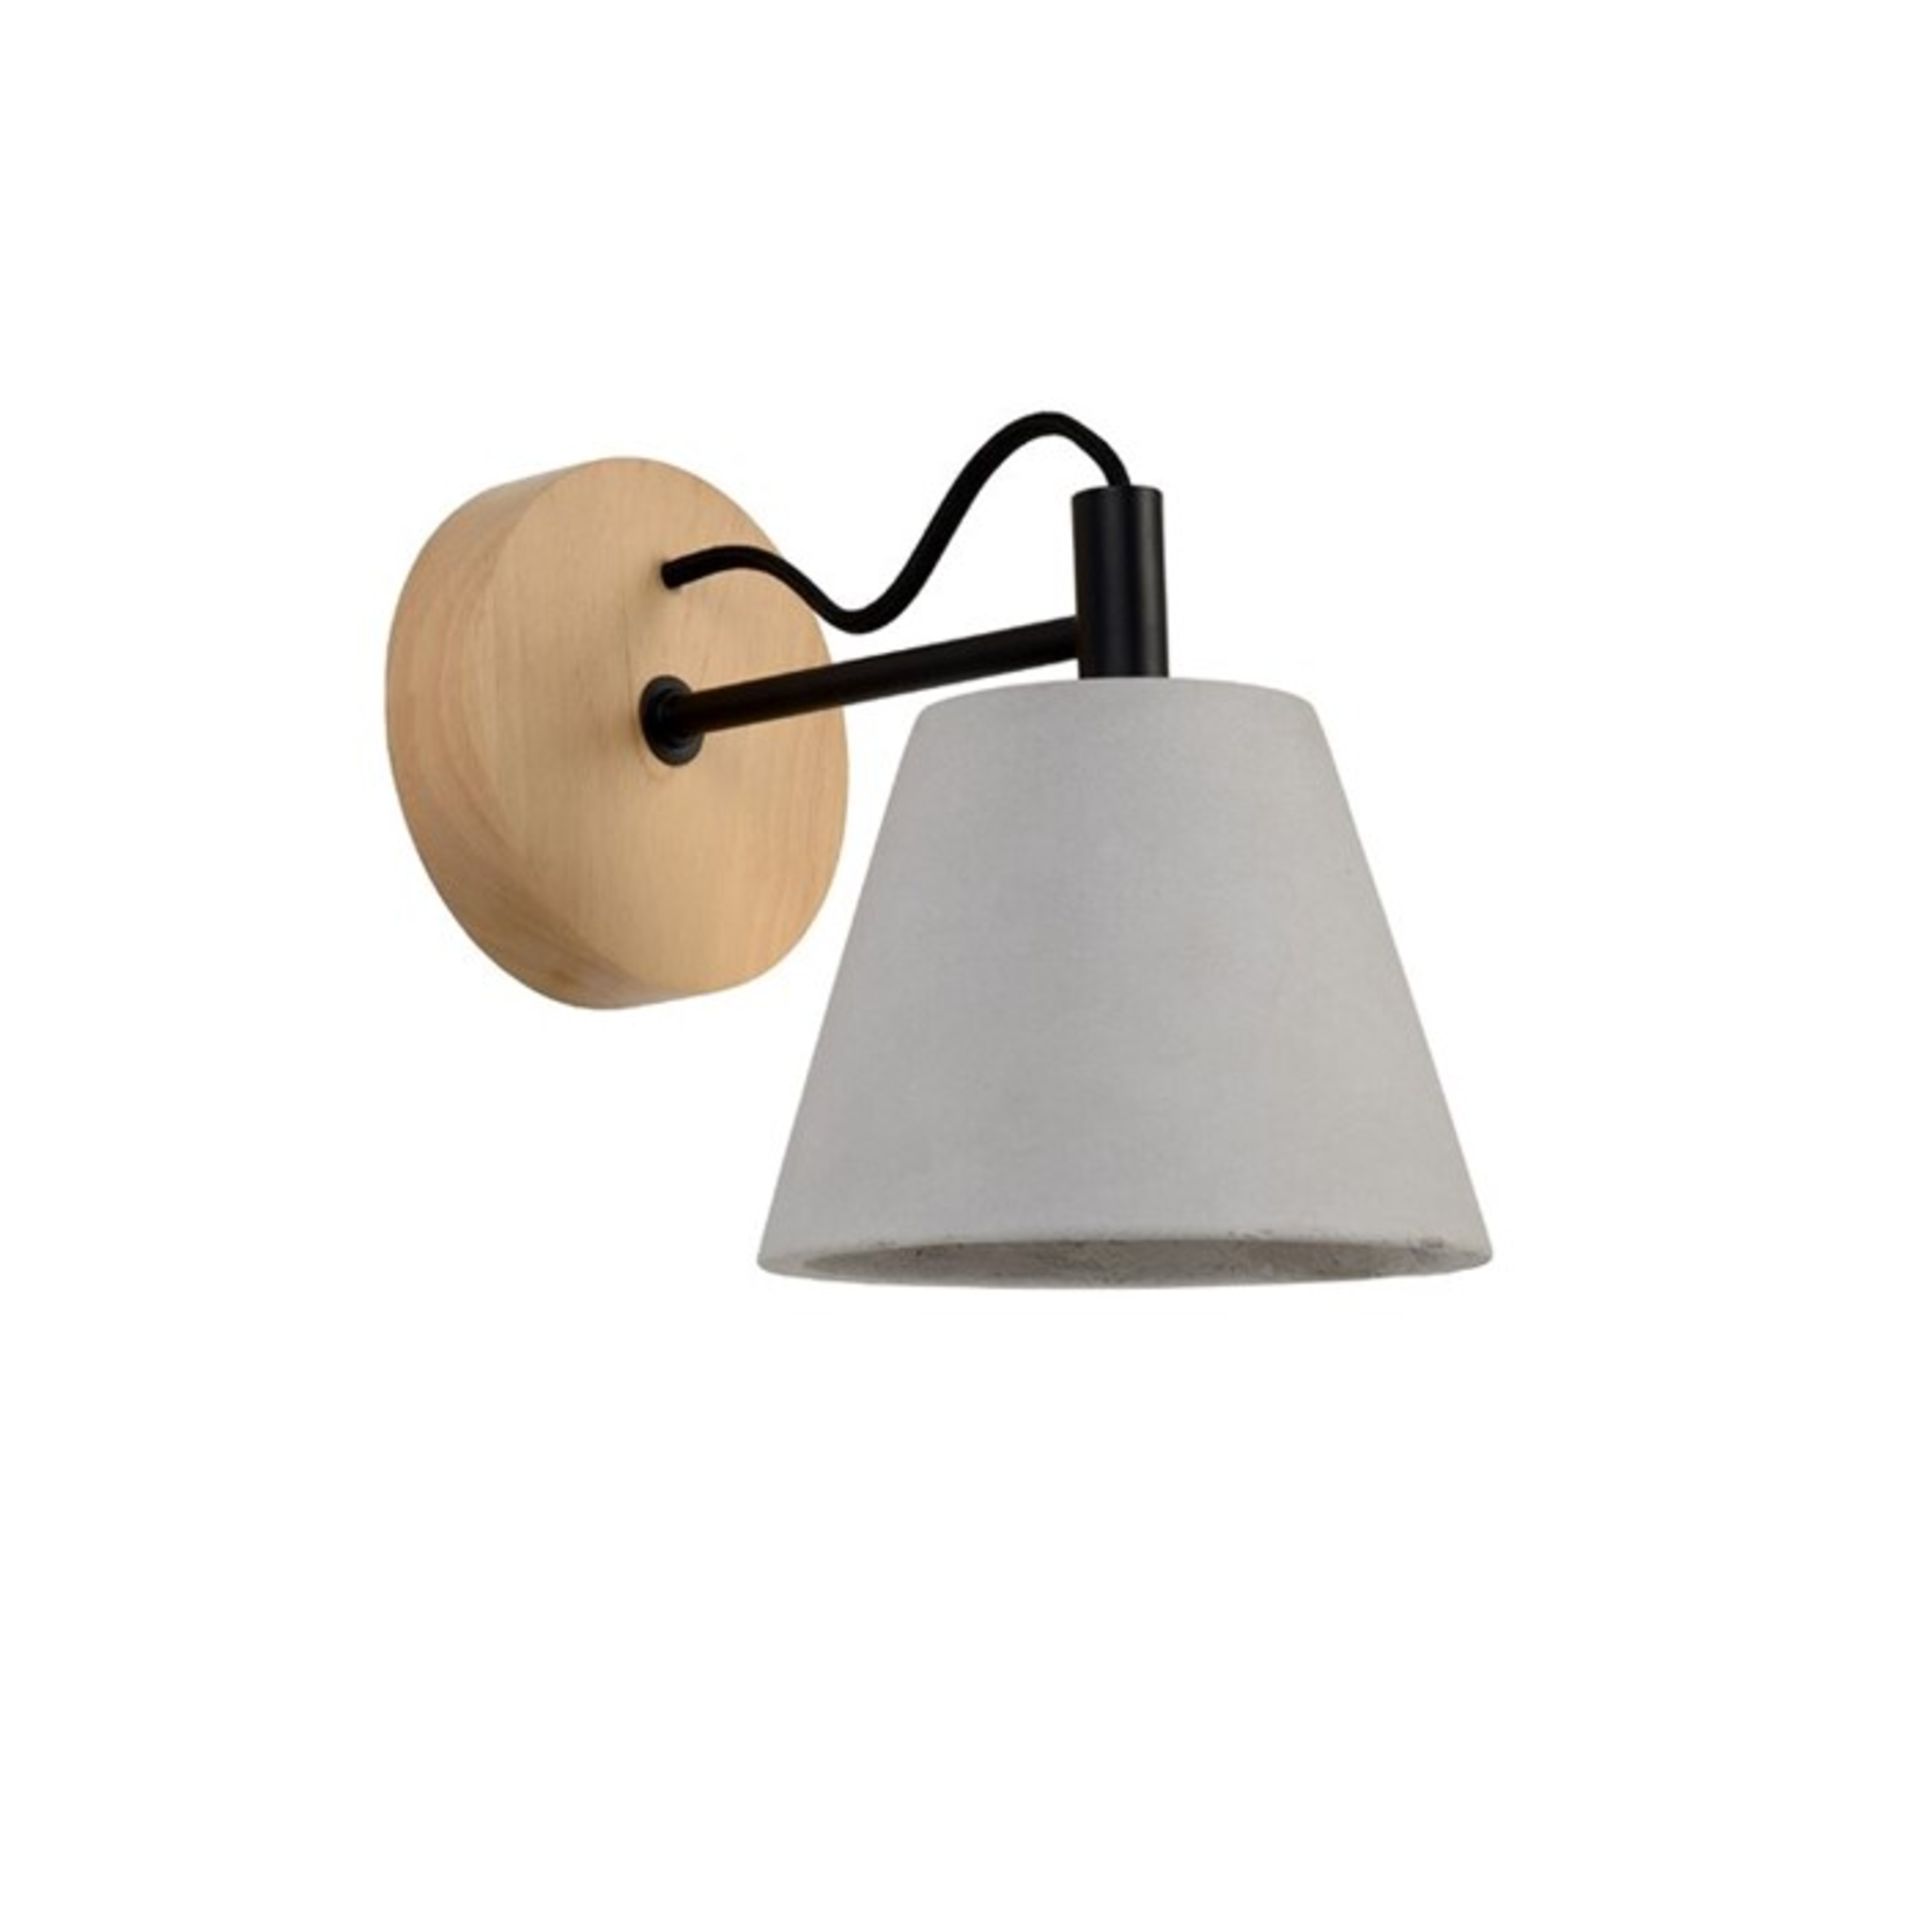 Lucide, Possio 1-Light Swing Arm Wall Light - RRP £31.99 (LCDE1083 - 16577/45) 5D